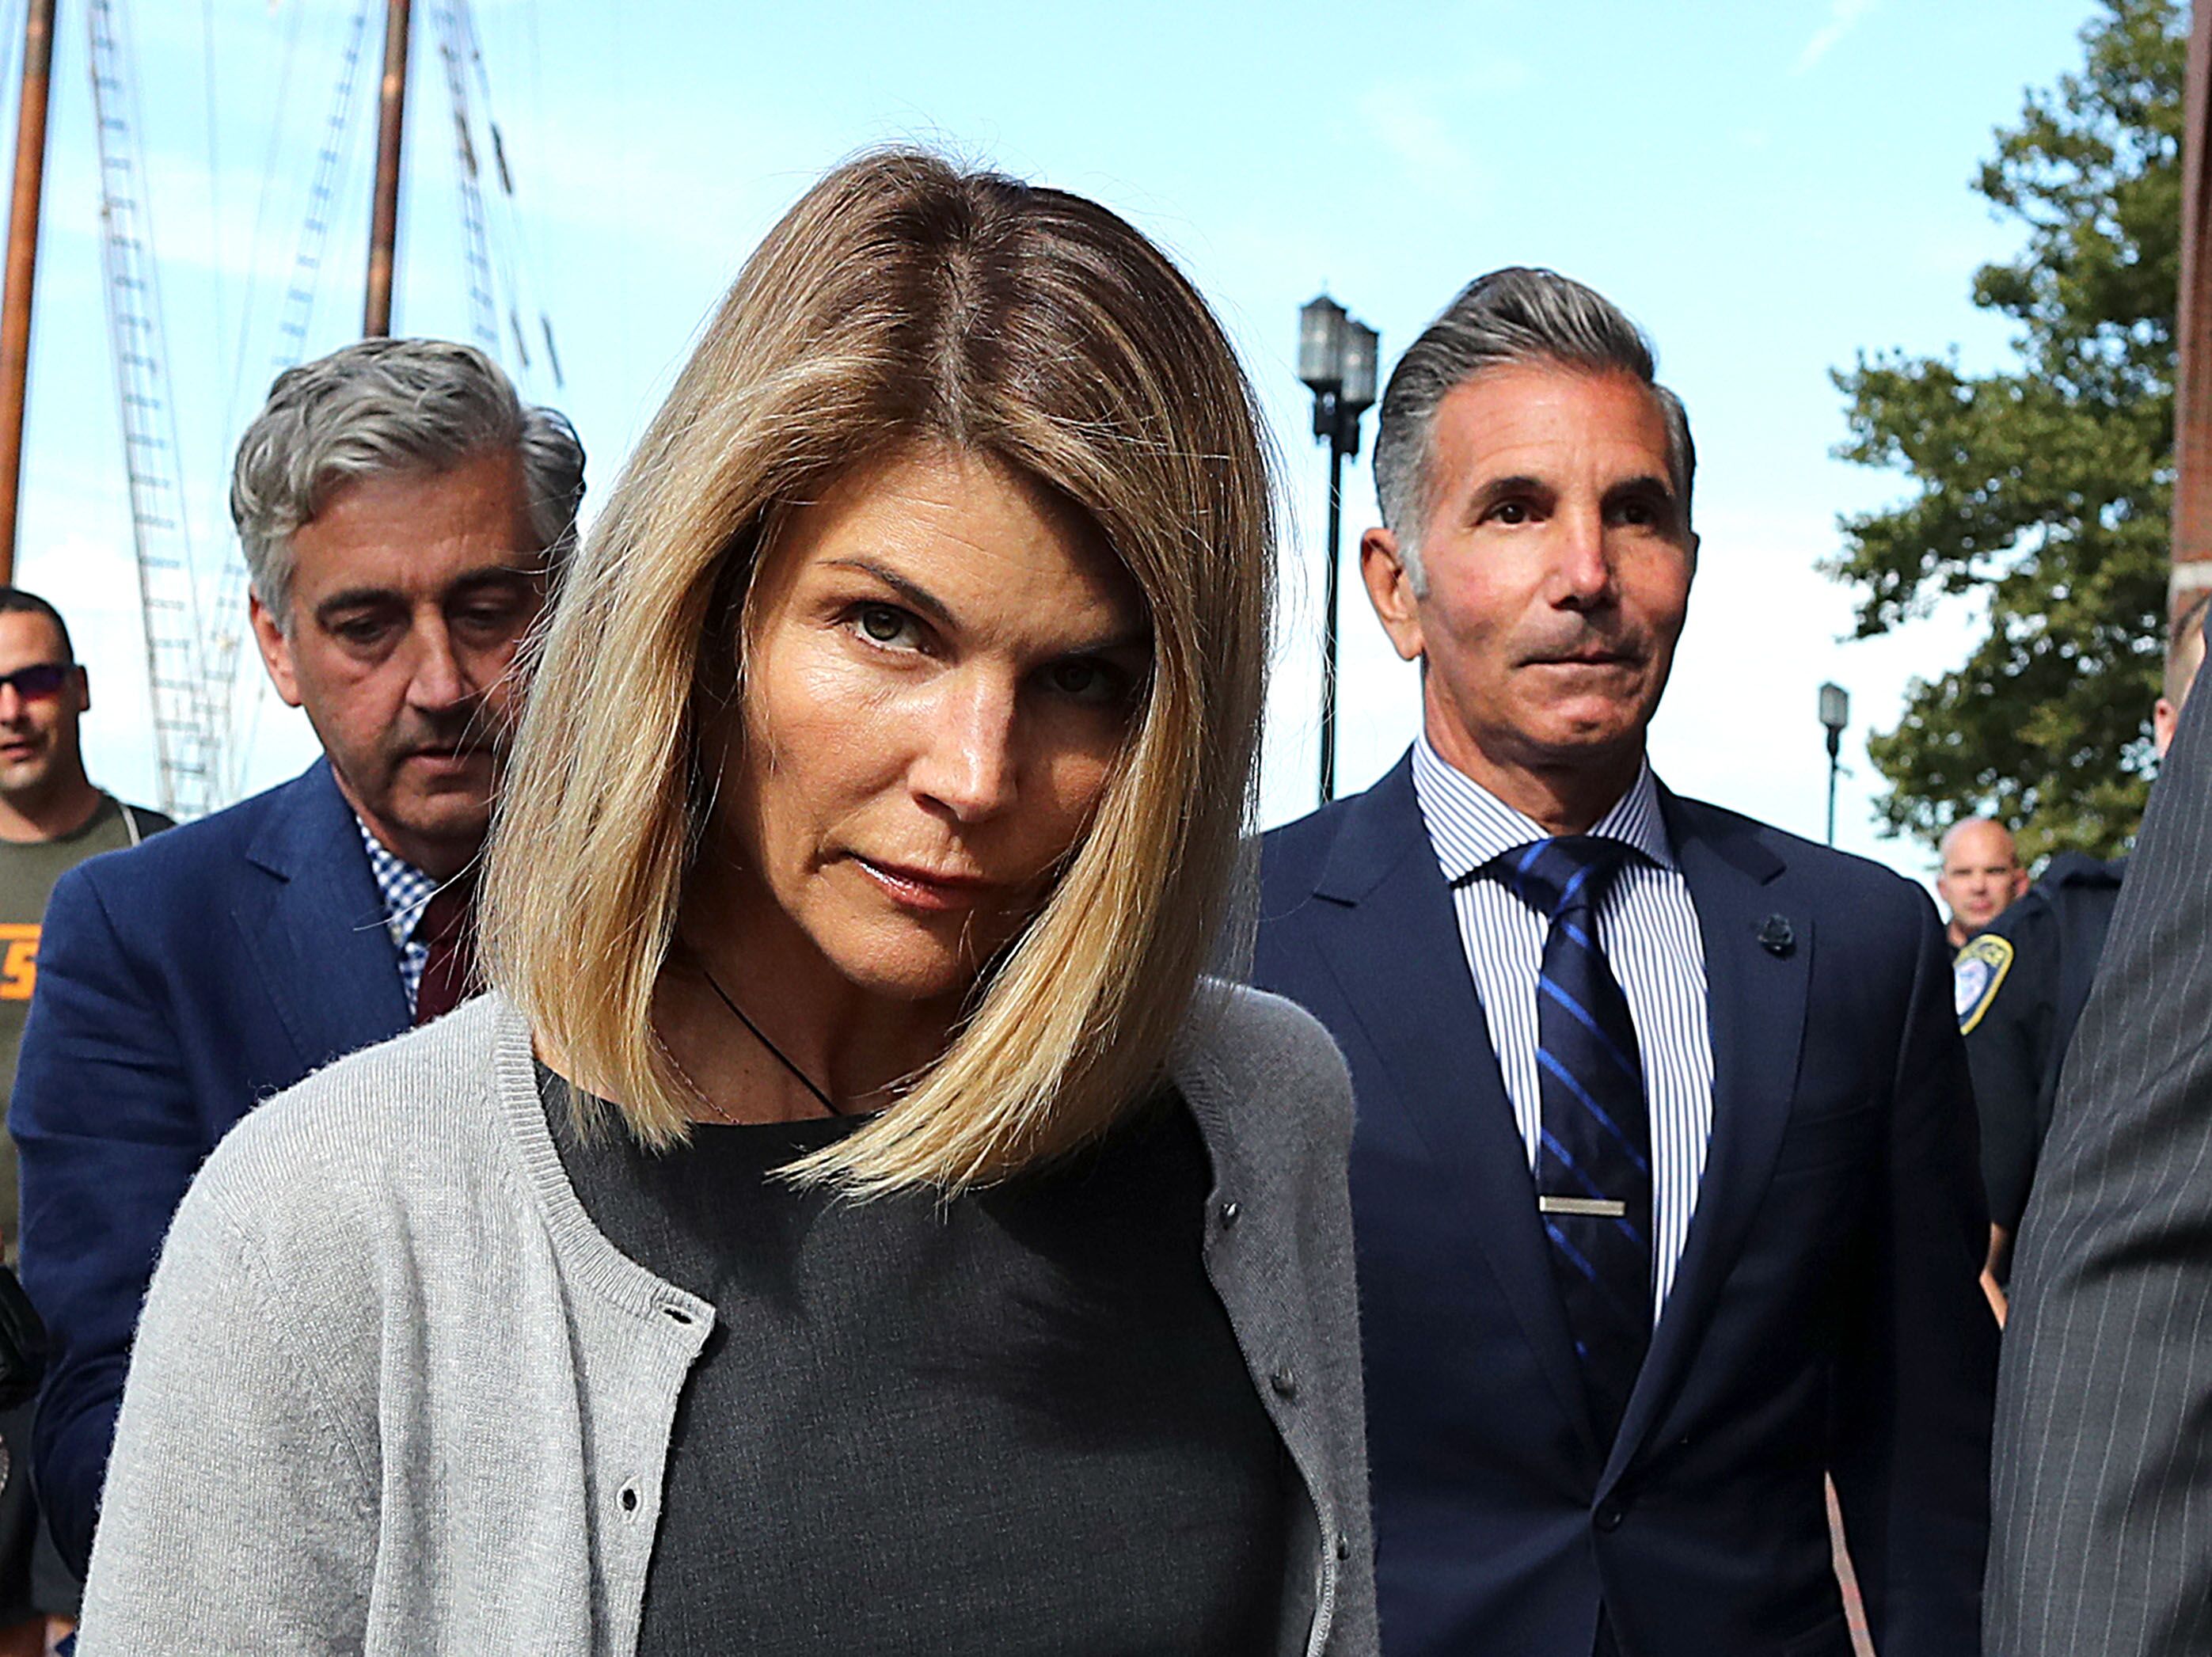 Lori Loughlin and her husband Mossimo Giannulli, right, leave the John Joseph Moakley United States Courthouse in Boston | Photo: Getty Images